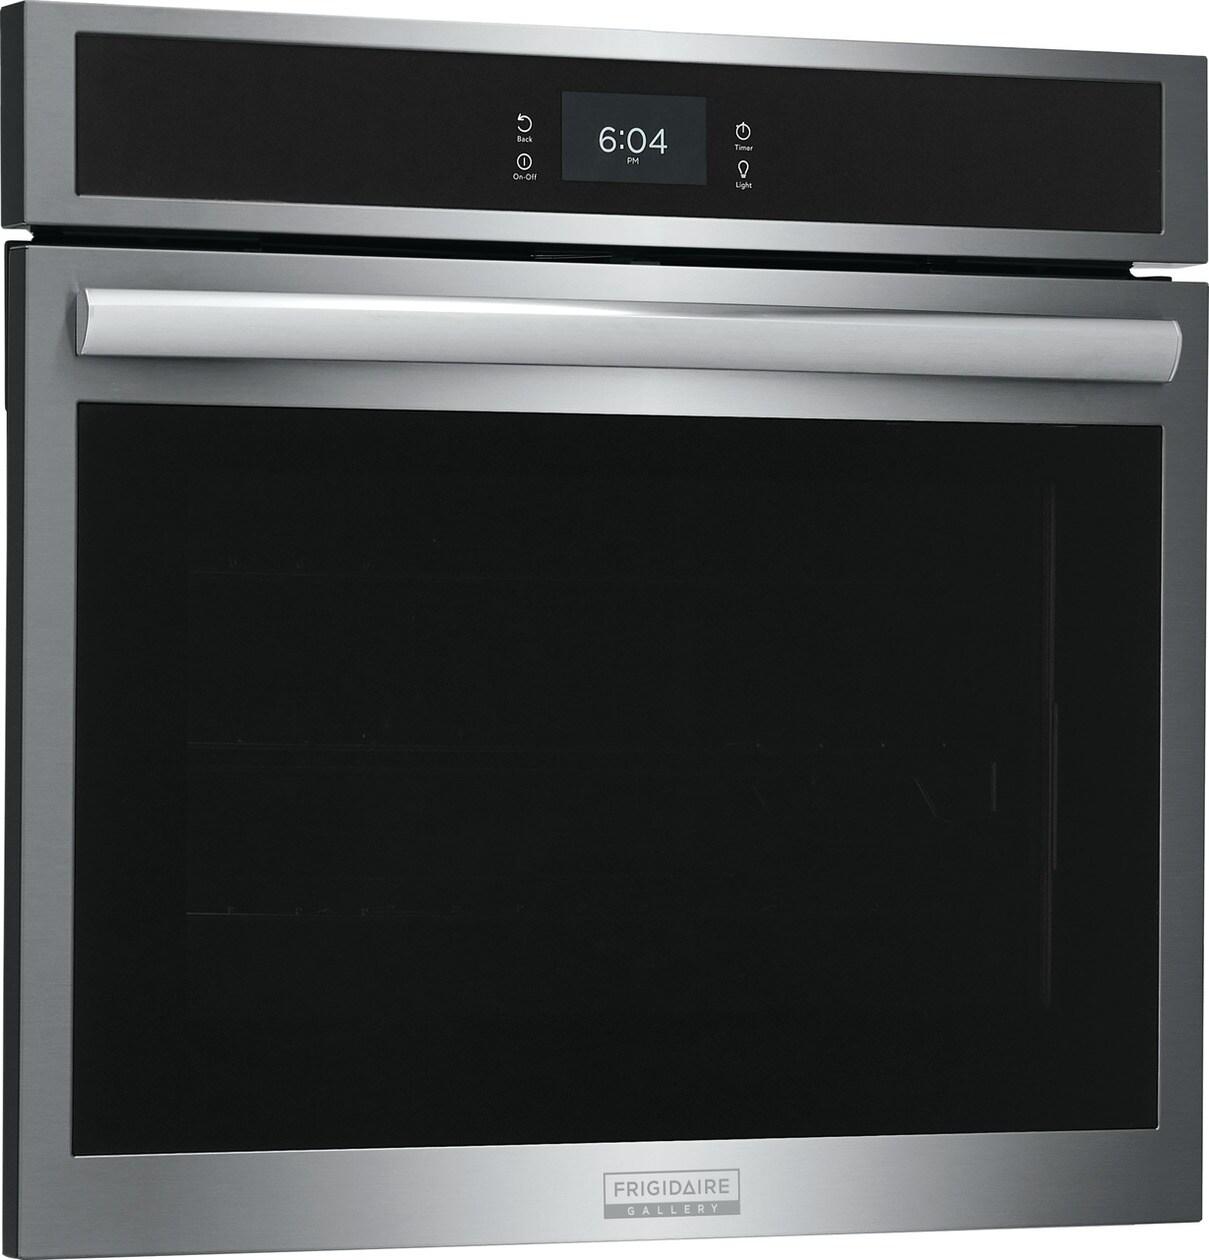 Frigidaire Gallery 30" Single Electric Wall Oven with Total Convection